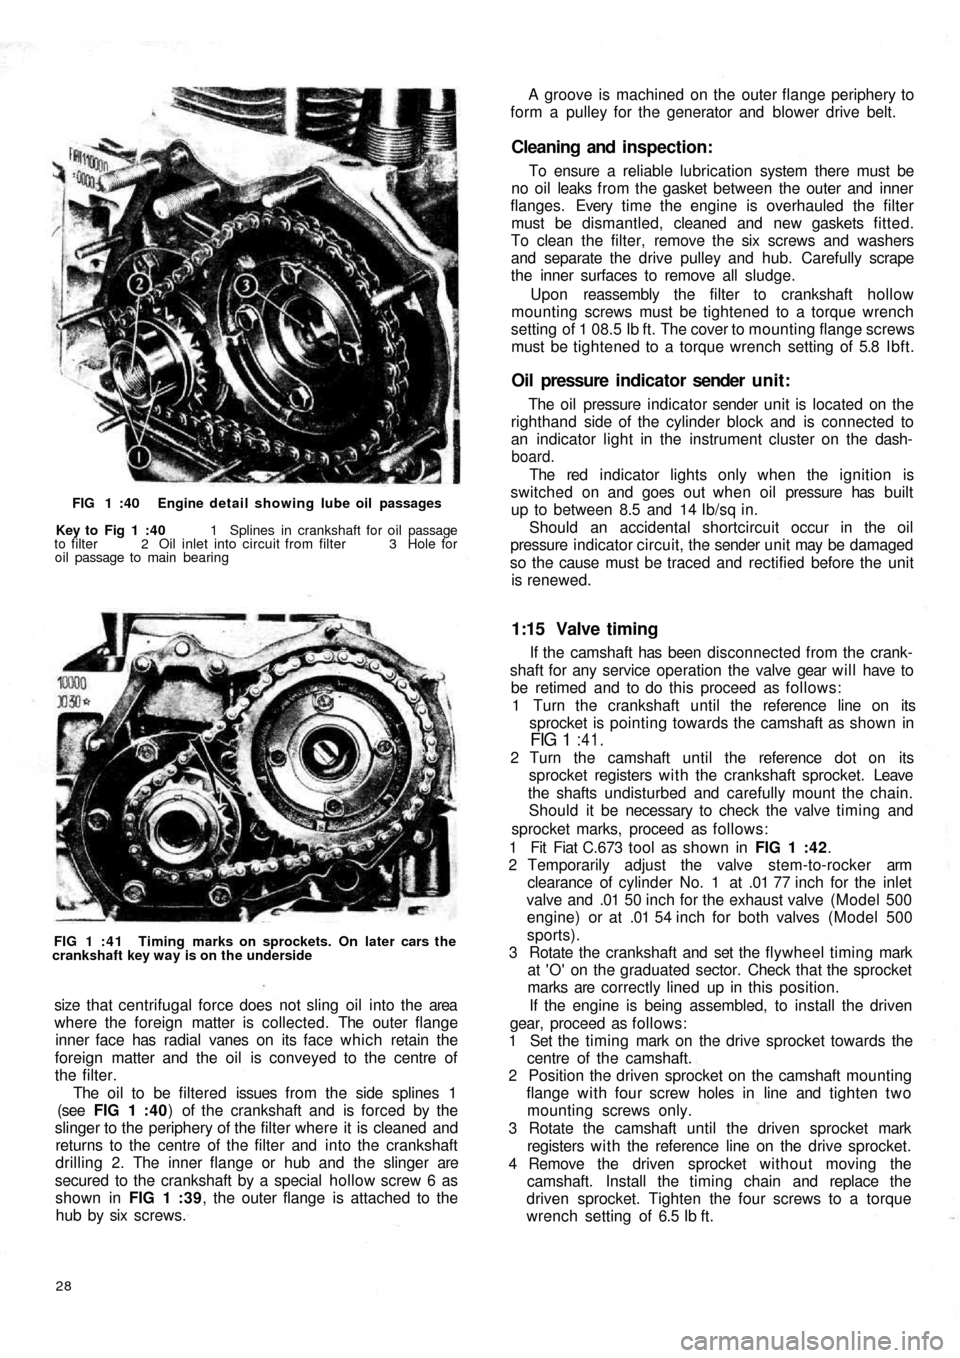 FIAT 500 1967 1.G Workshop Manual FIG 1 :40  Engine detail showing lube oil passages
Key to Fig 1 :40  1  Splines in crankshaft for oil passage
to filter  2  Oil inlet into circuit from filter 3 Hole for
oil passage to main bearing
FI